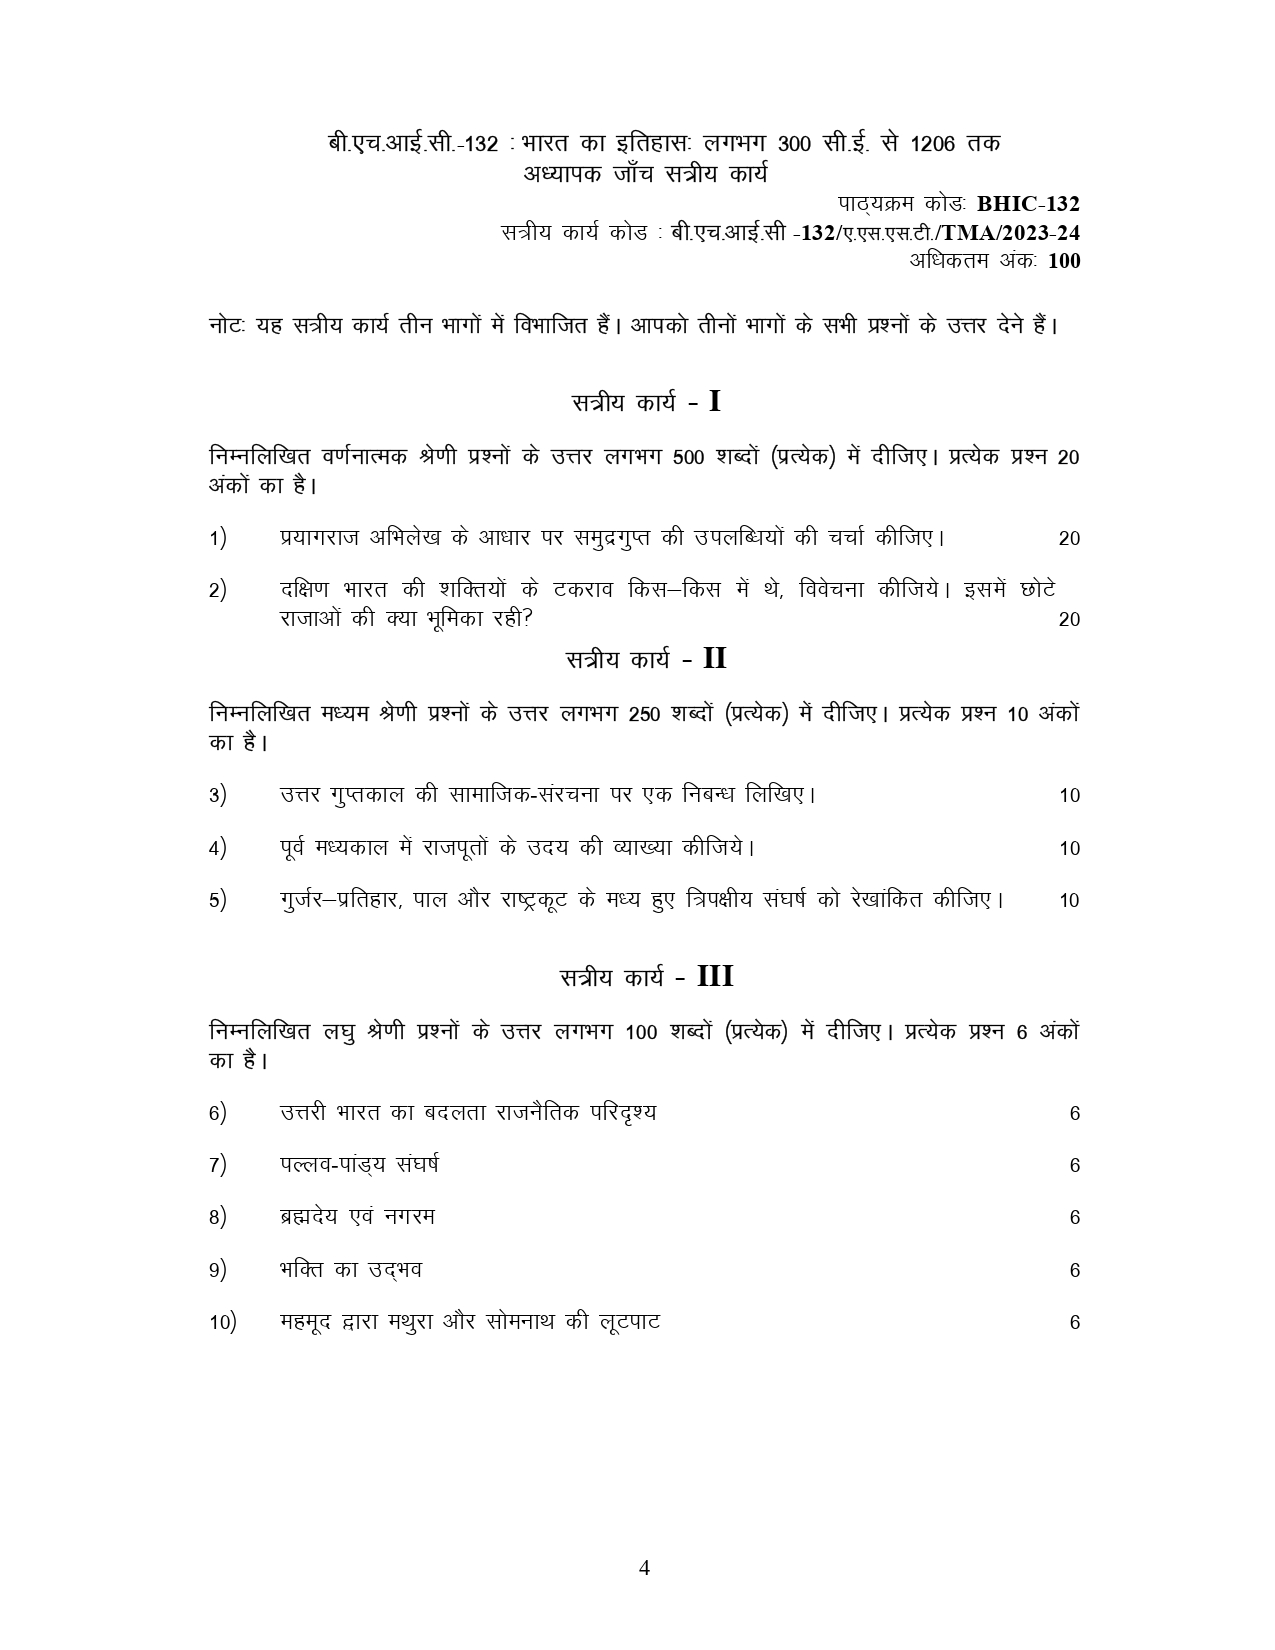 IGNOU BHIC 132 HINDI SOLVED ASSIGNMENT 2023-24